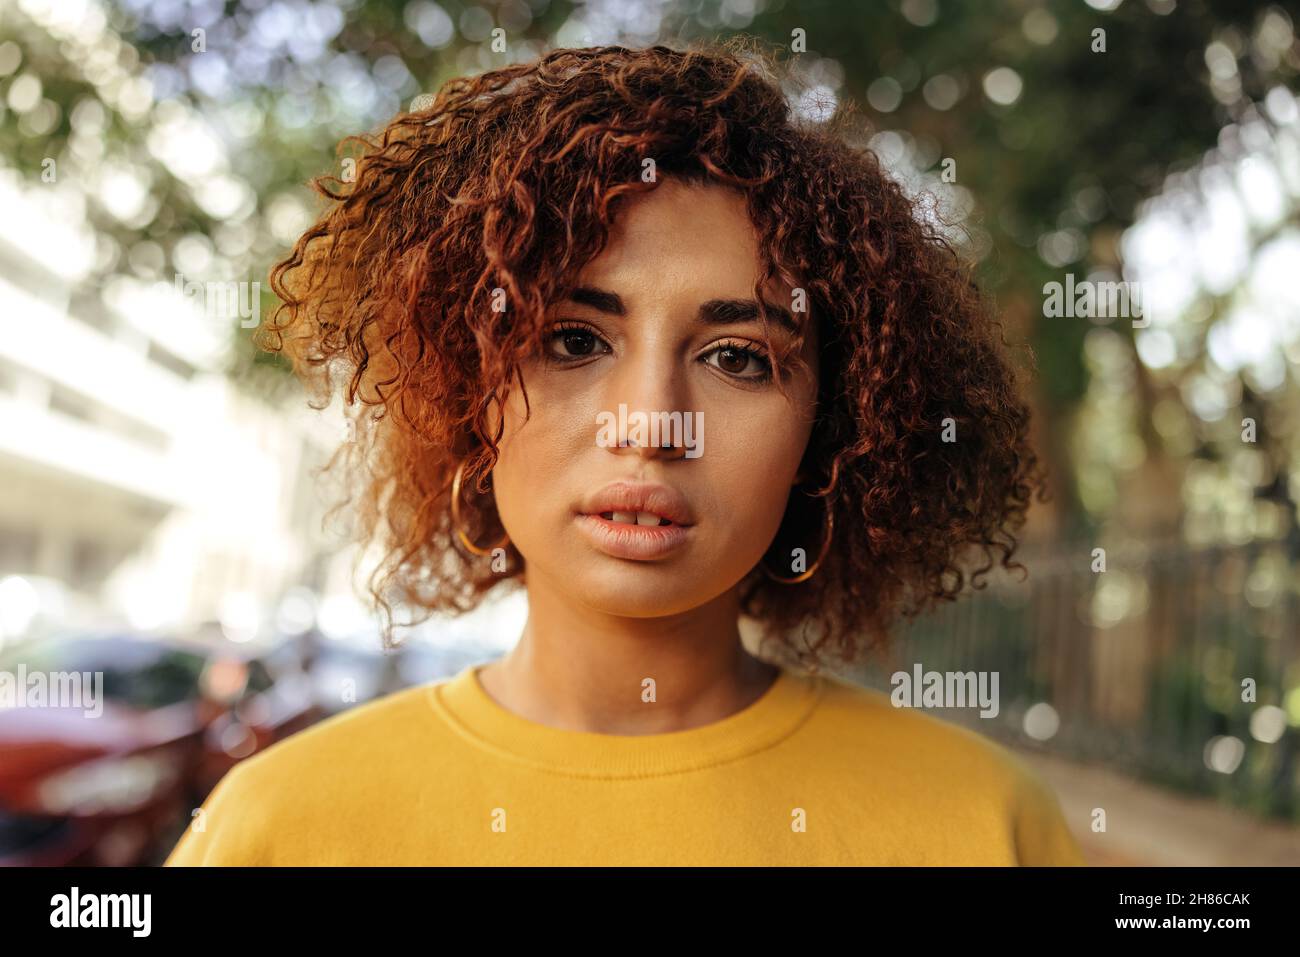 Closeup of a teenage girl looking at the camera. Portrait of a beautiful female youngster wearing red hair and a mustard sweatshirt in the city. Young Stock Photo